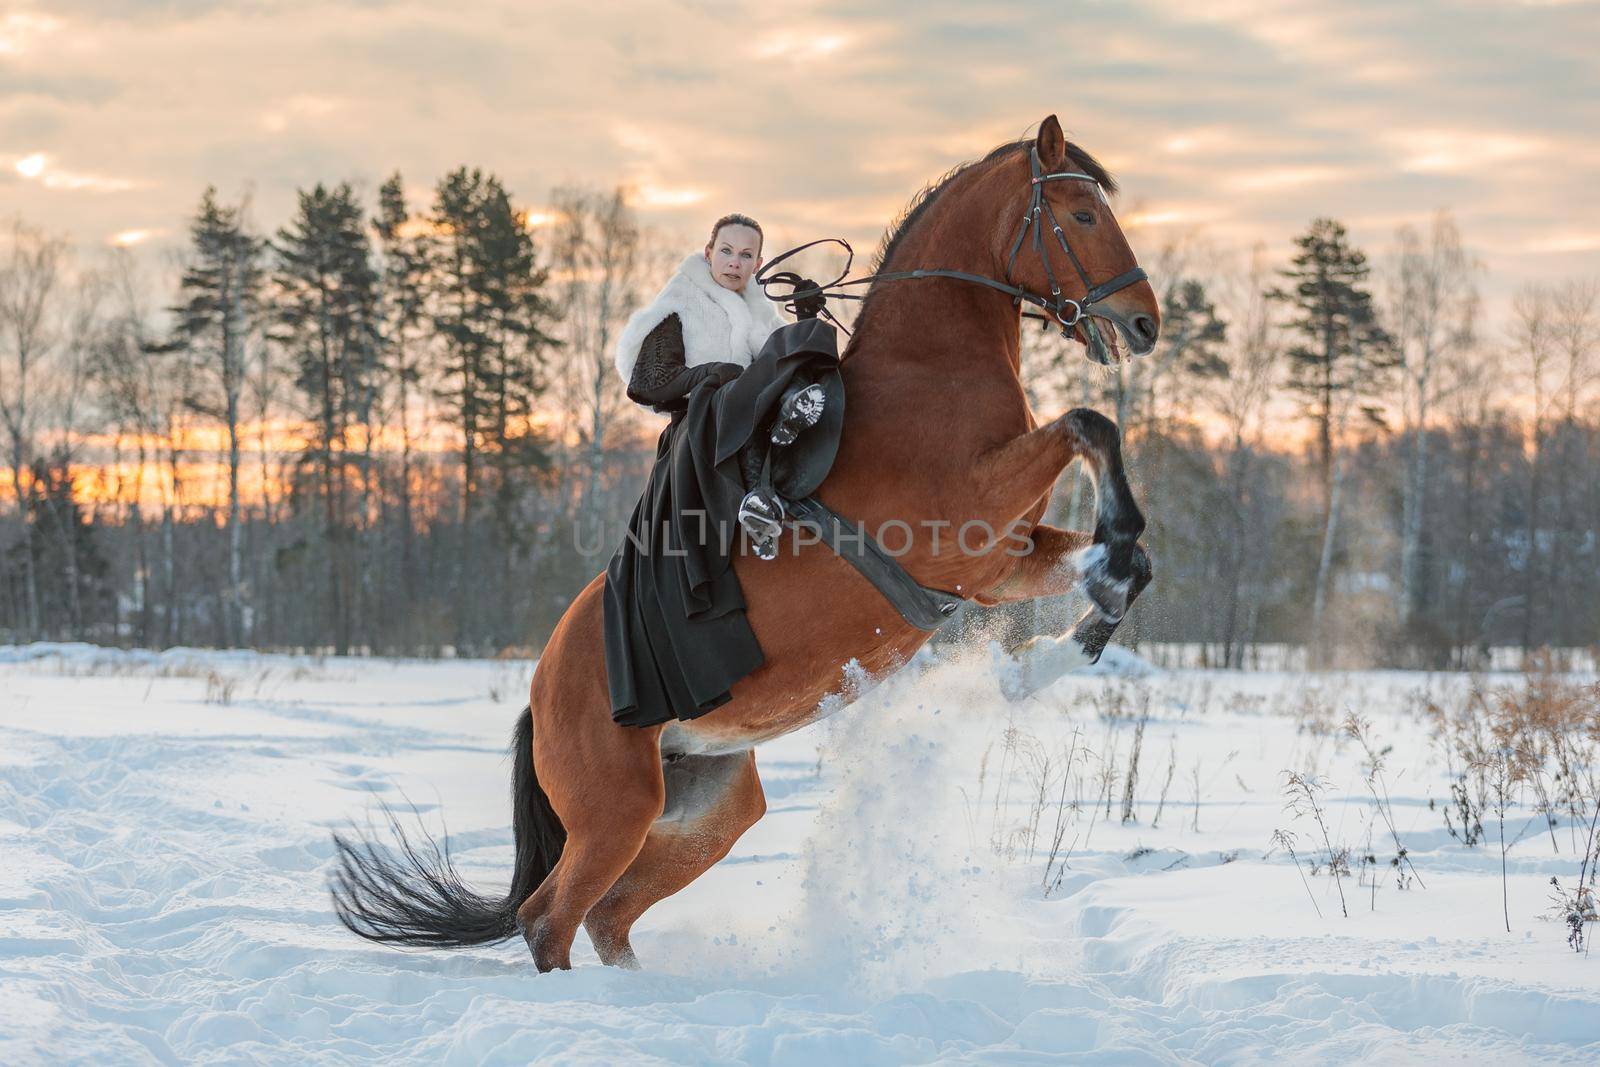 A girl in a white cloak rides a brown horse in winter. Golden hour, setting sun. The horse rears up.